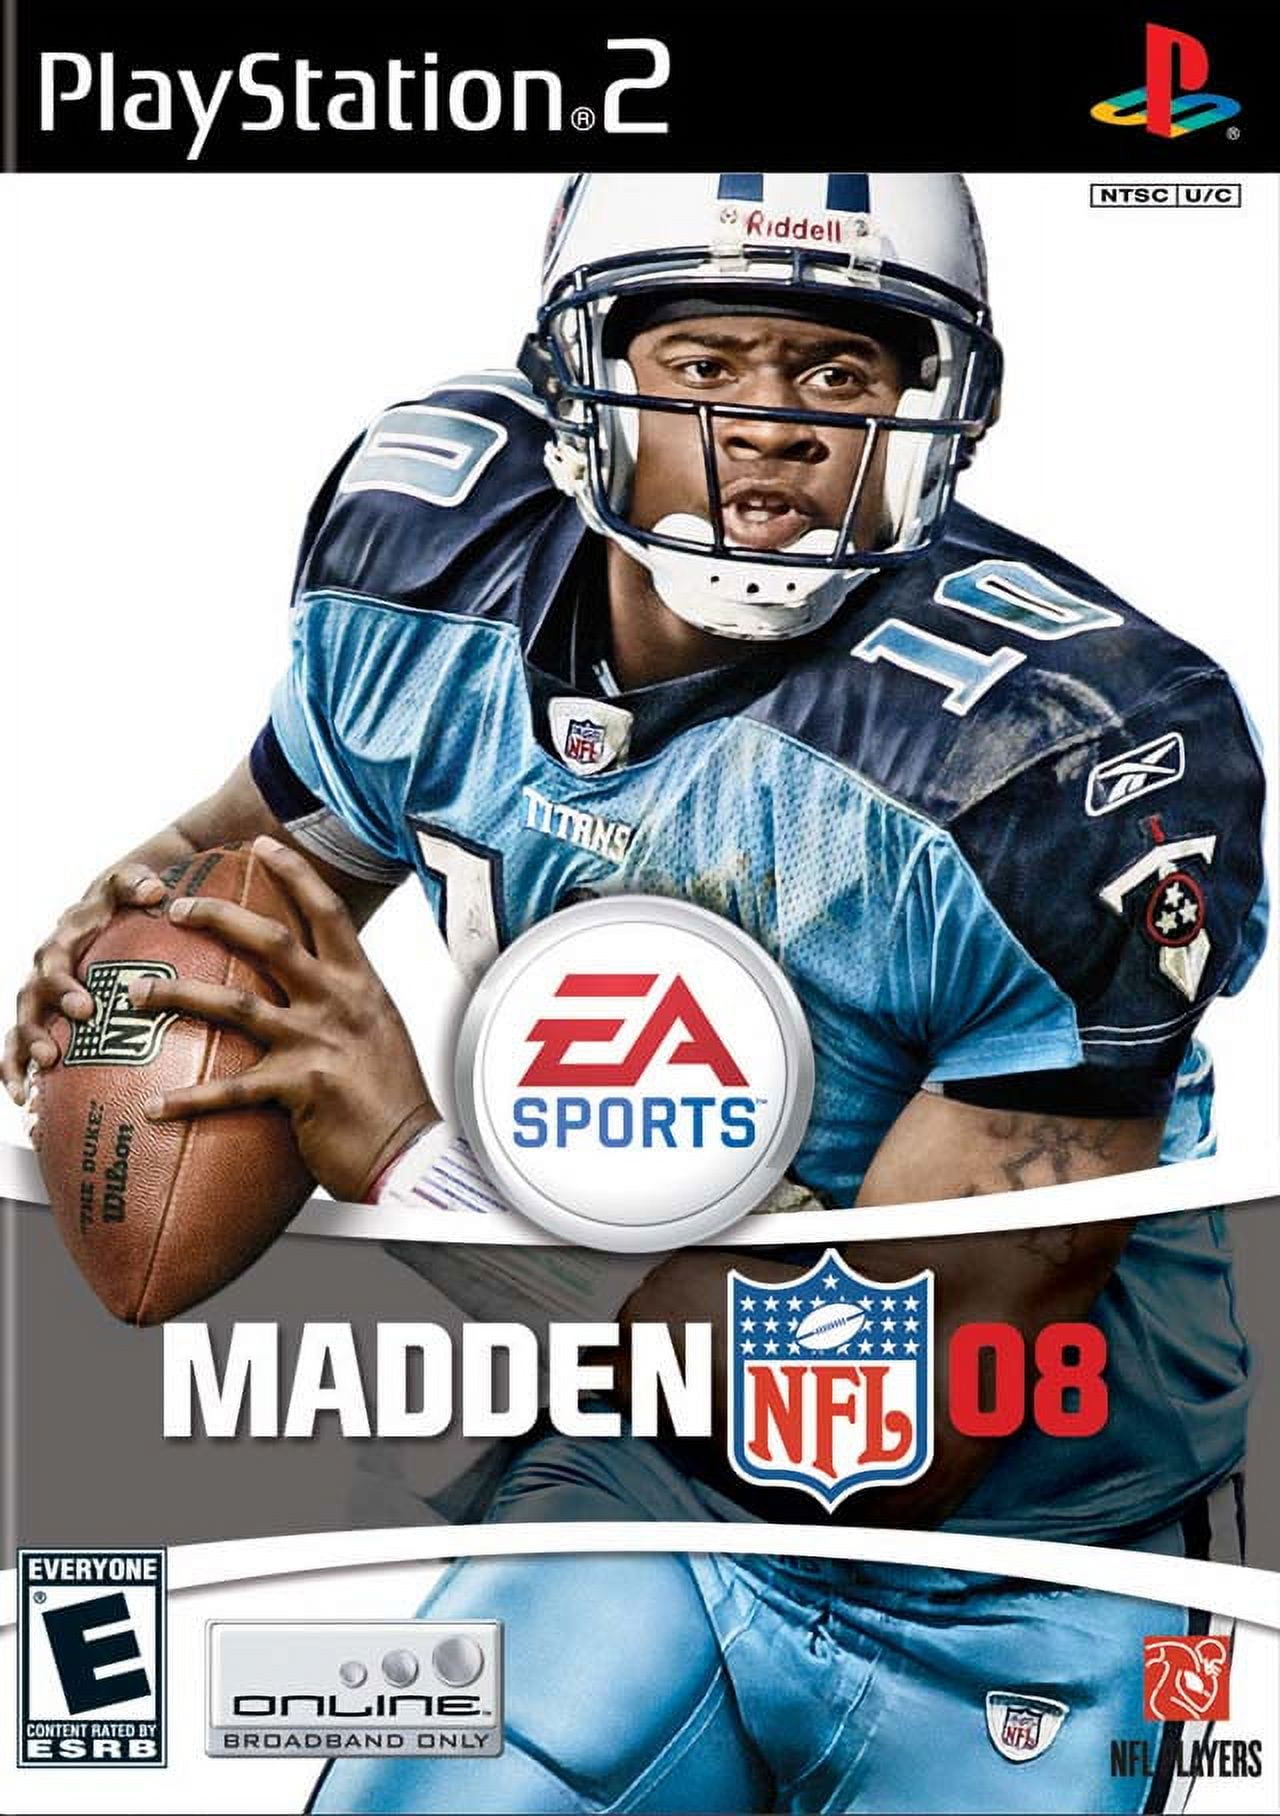 : Madden NFL 07 Hall of Fame Edition - PlayStation 2 : Video Games